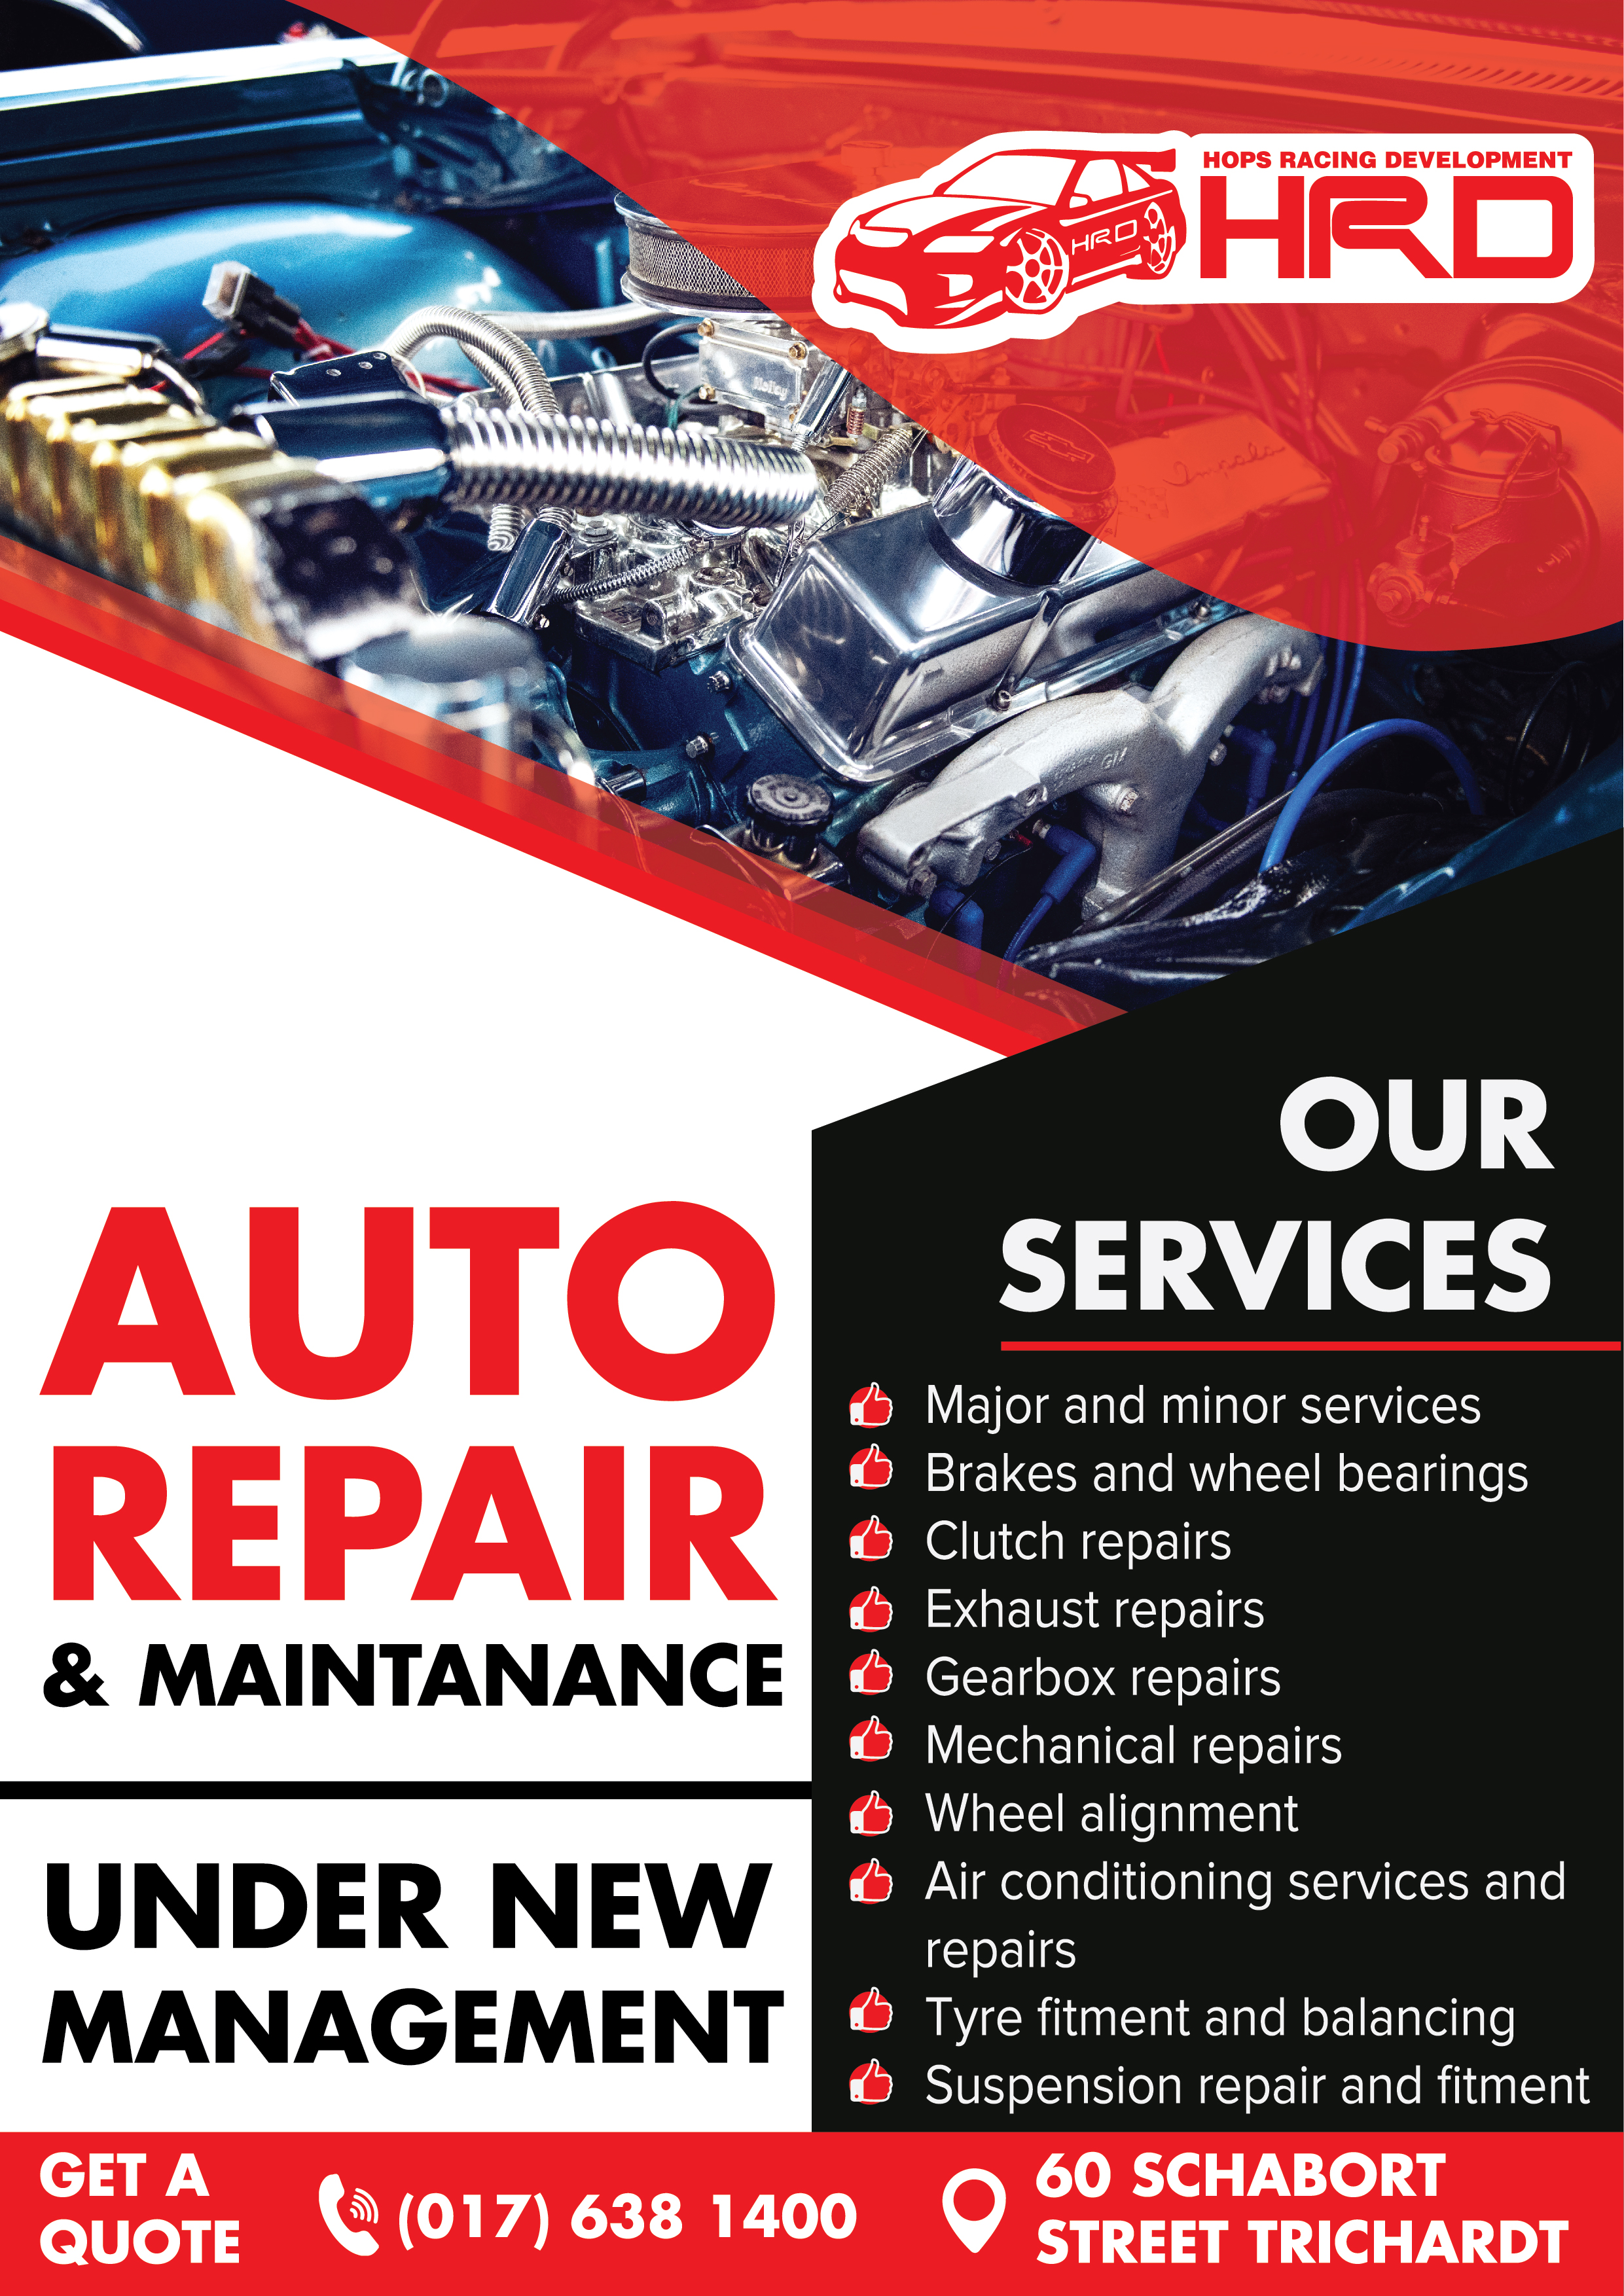 Auto repair and perfomarnce parts in Trichardt